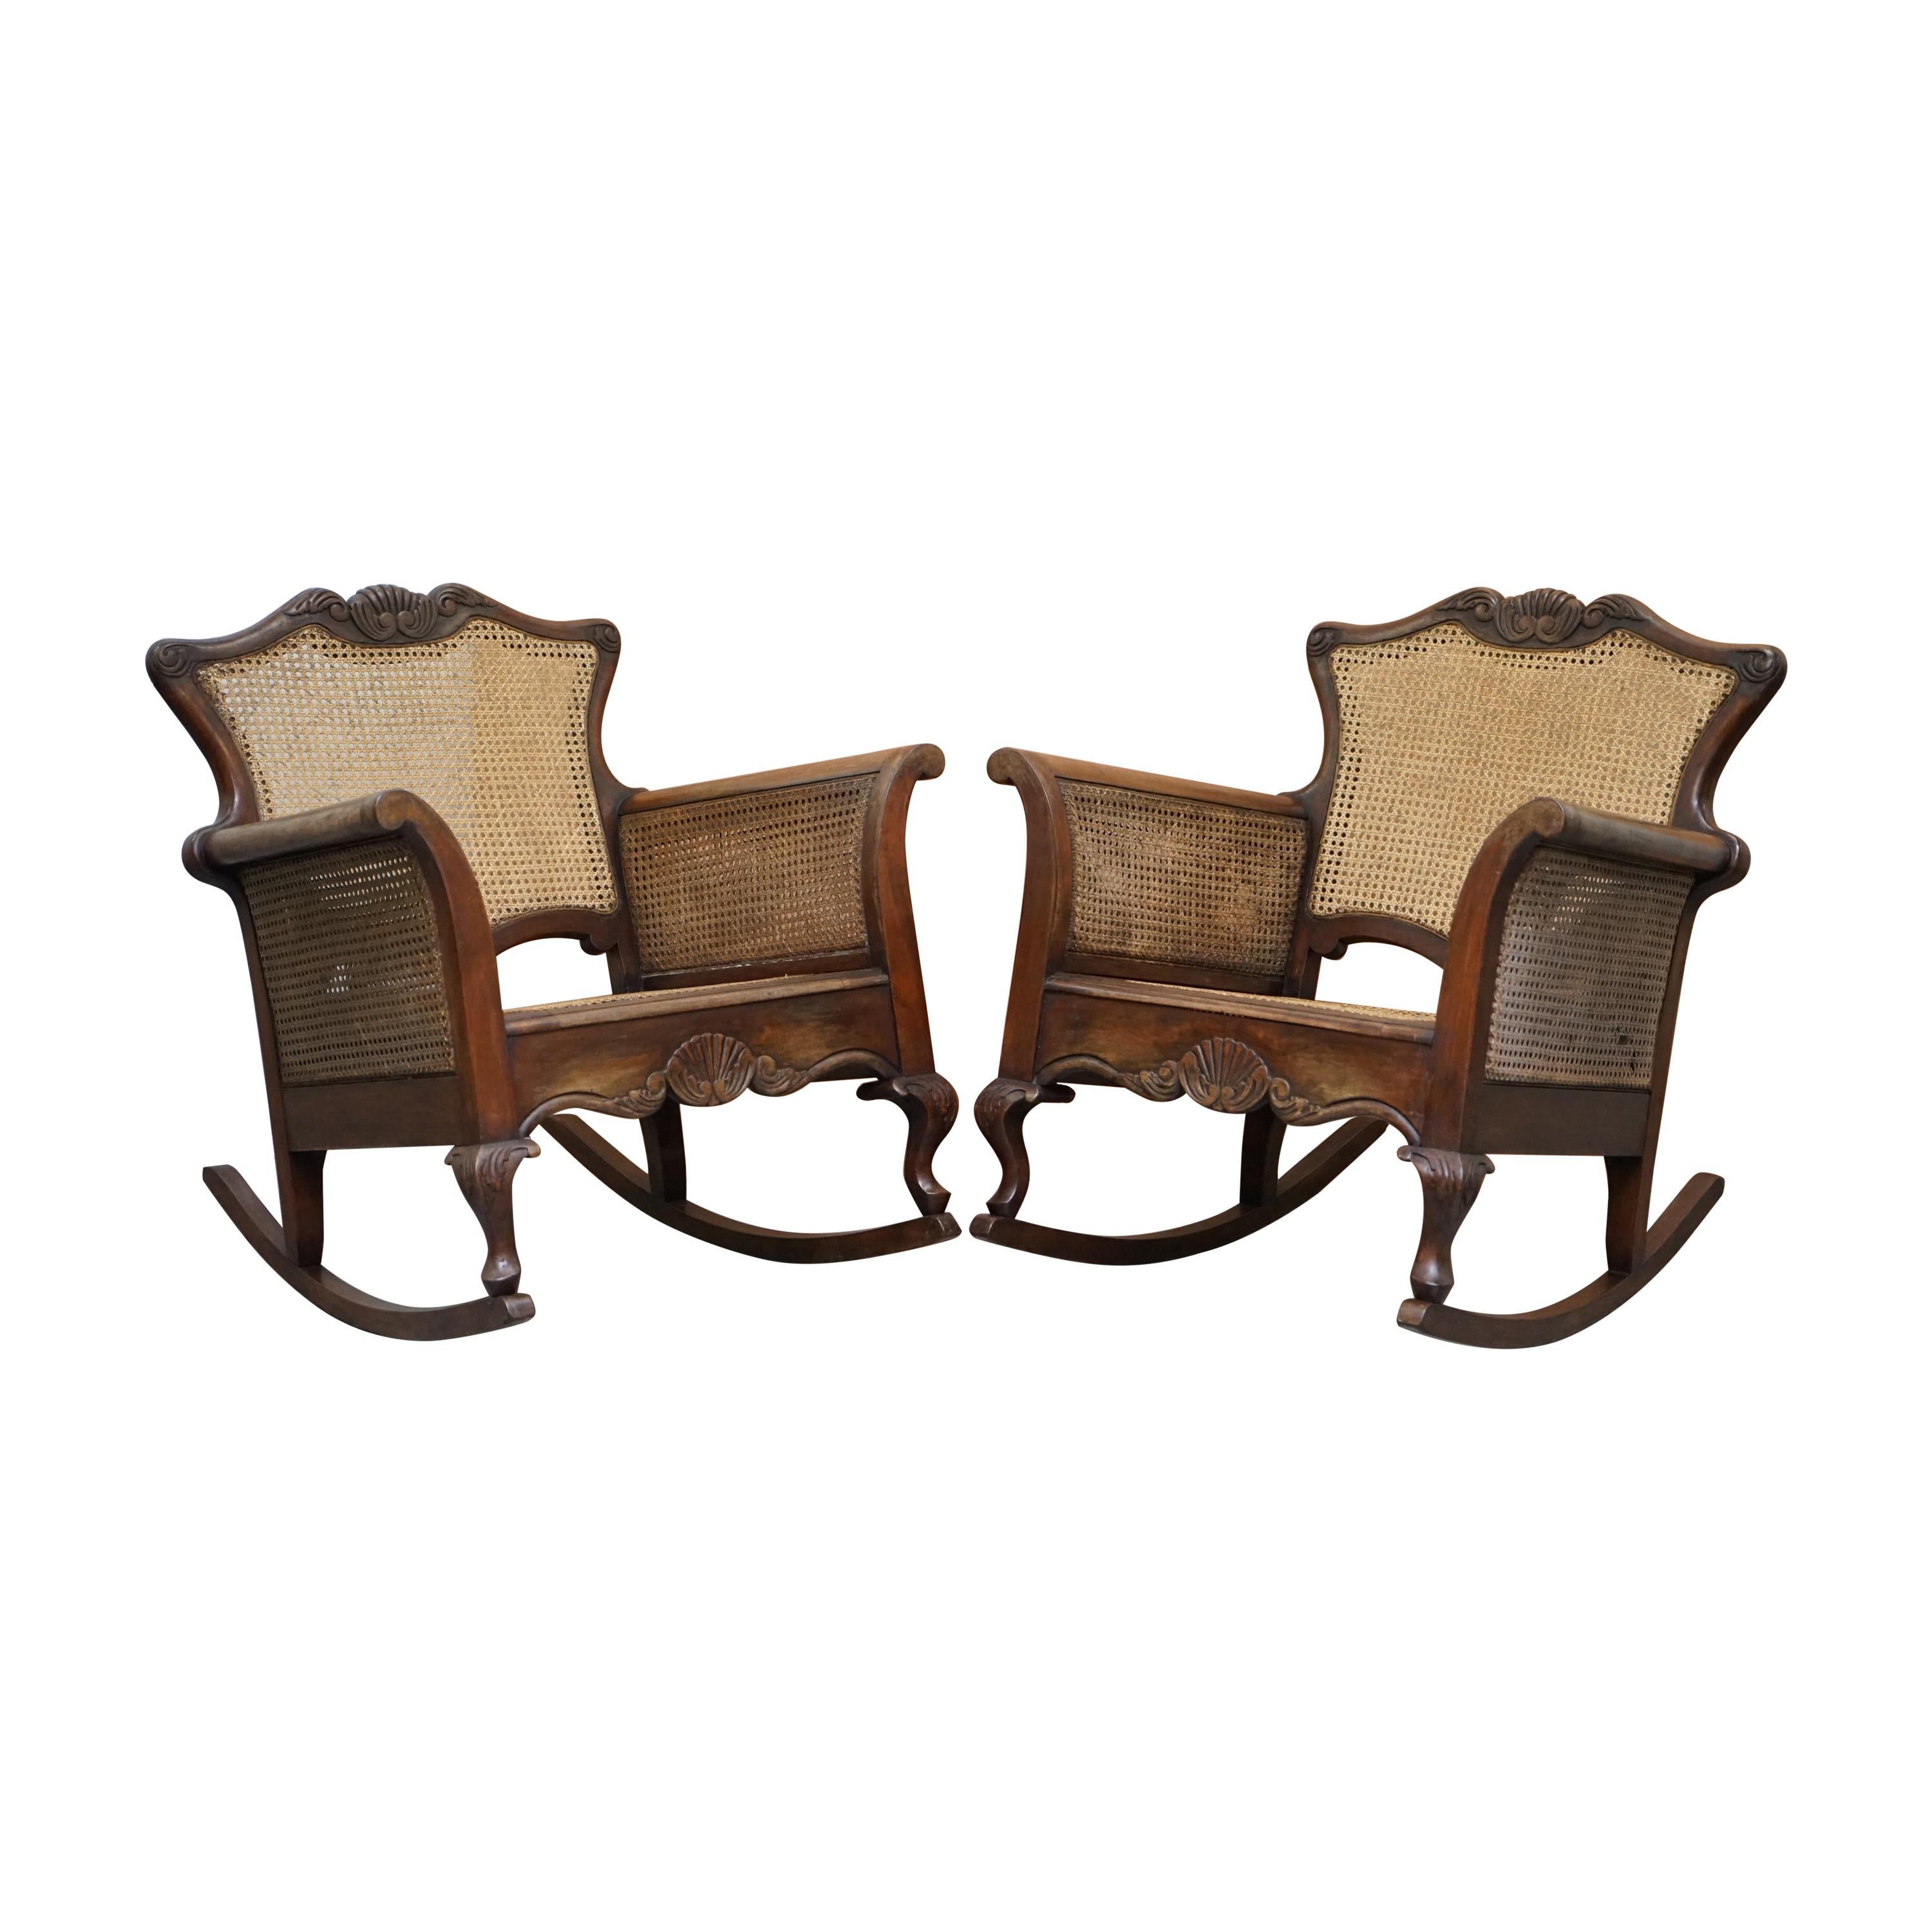 Pair of Carved Wood circa 1920s Italian Berger Rattan Rocking Armchair Chairs